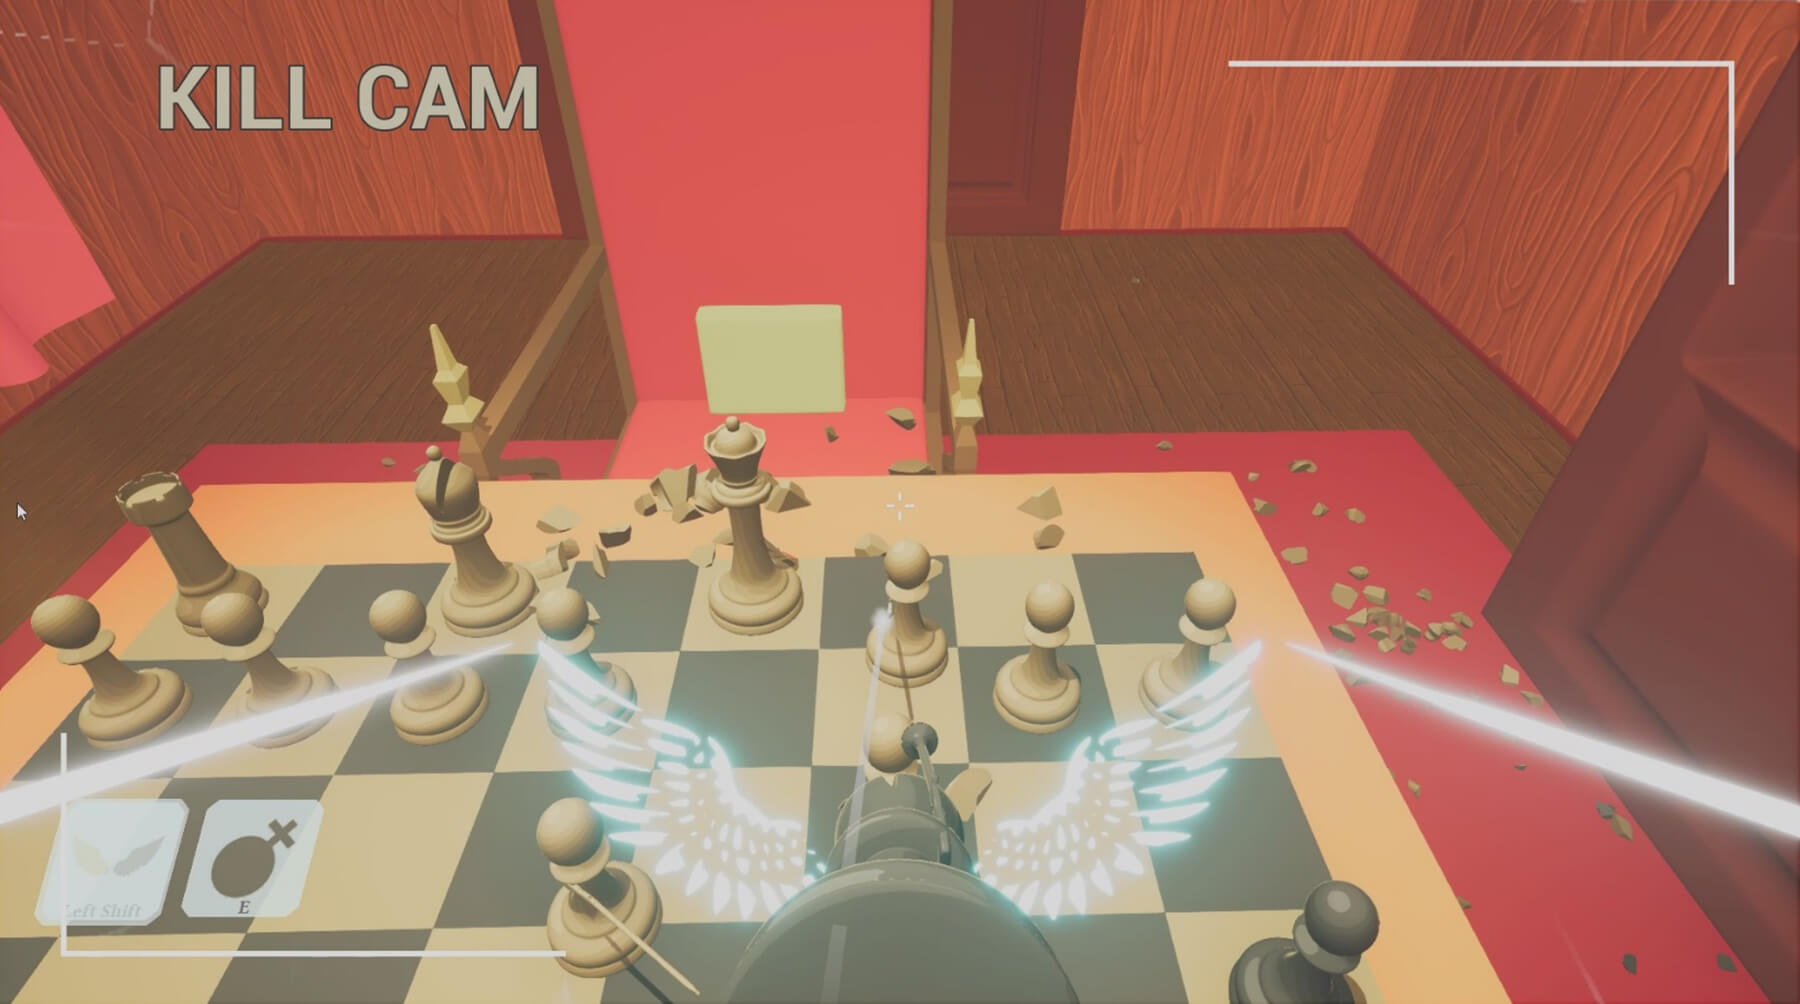 A bishop flies and shoots a pawn in an FPS Chess “Kill Cam” replay.